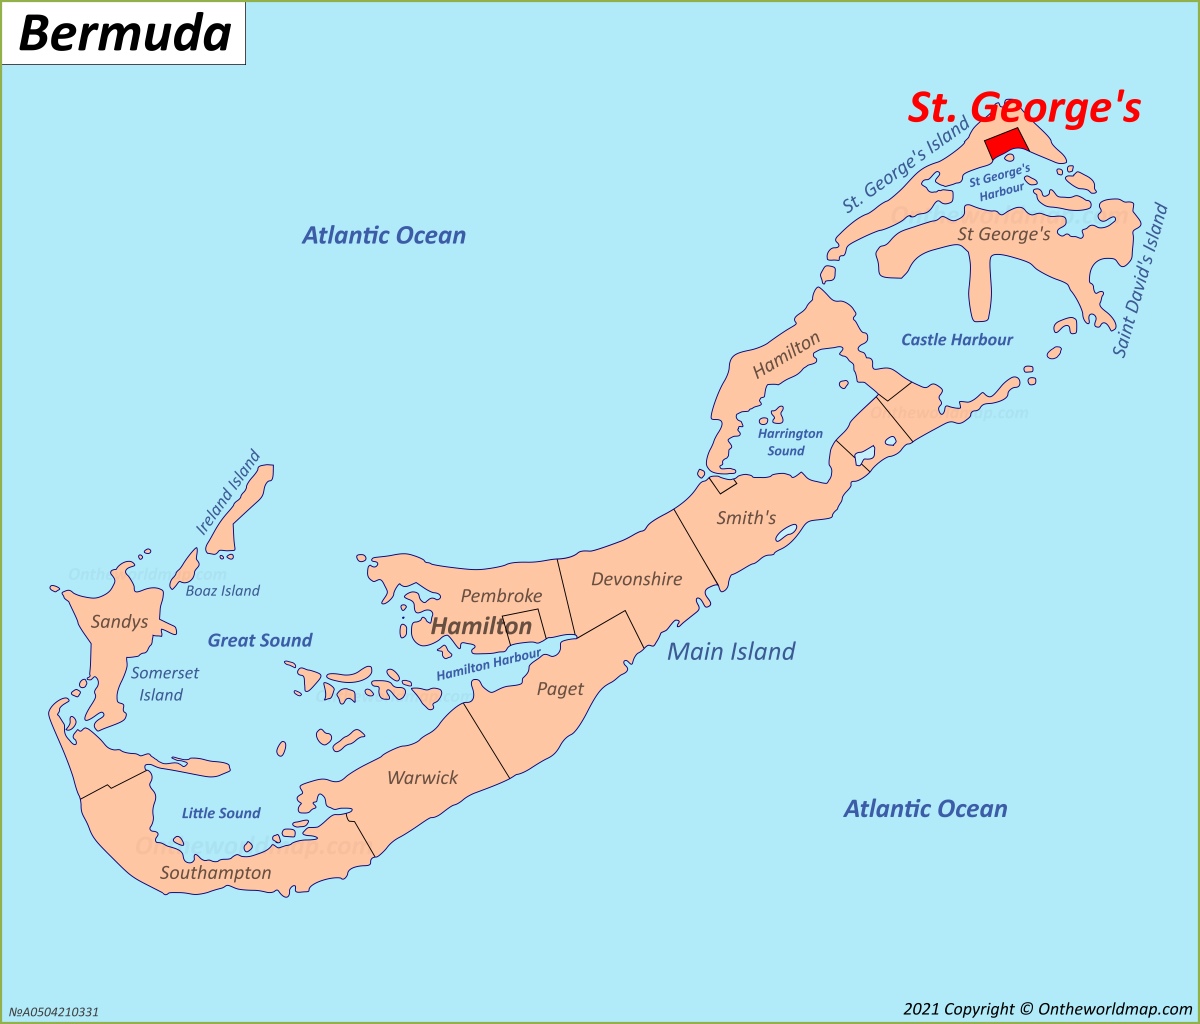 St. George's Location Map